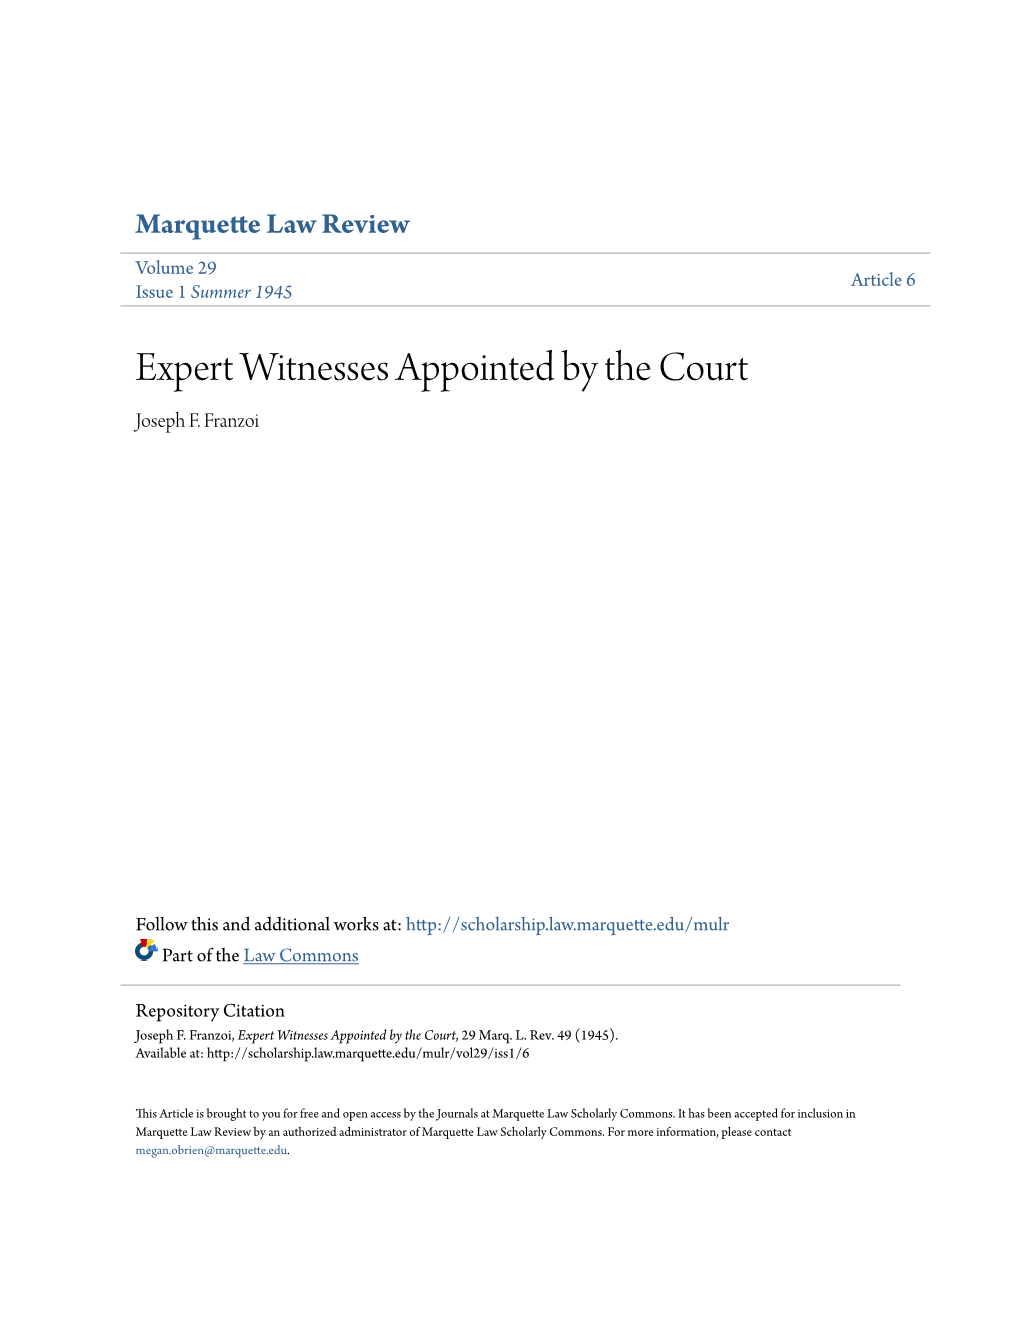 Expert Witnesses Appointed by the Court Joseph F